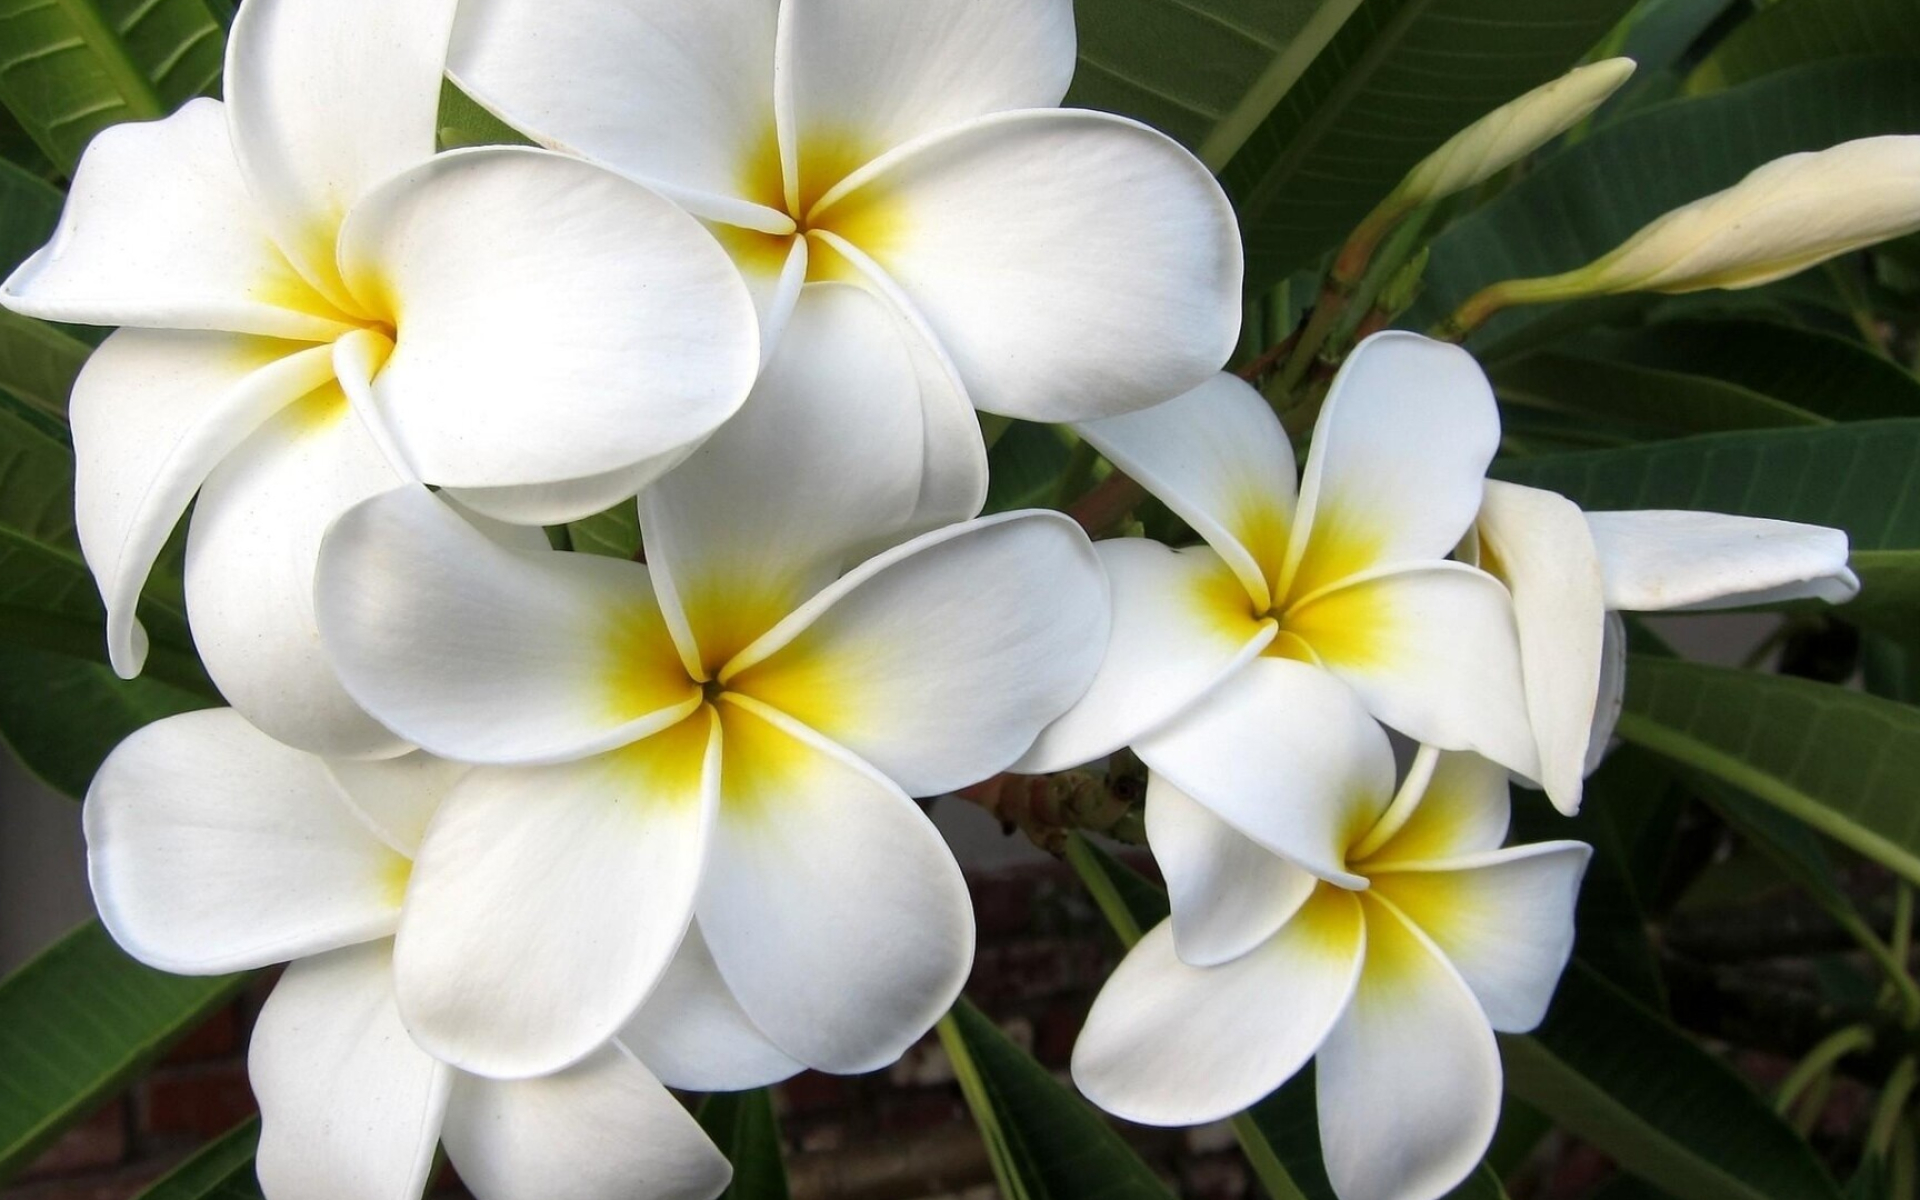 Frangipani Flower: Red flowers aren’t used for weddings, so only white and cream colored Plumeria are considered appropriate for declaring love between two people. 1920x1200 HD Wallpaper.